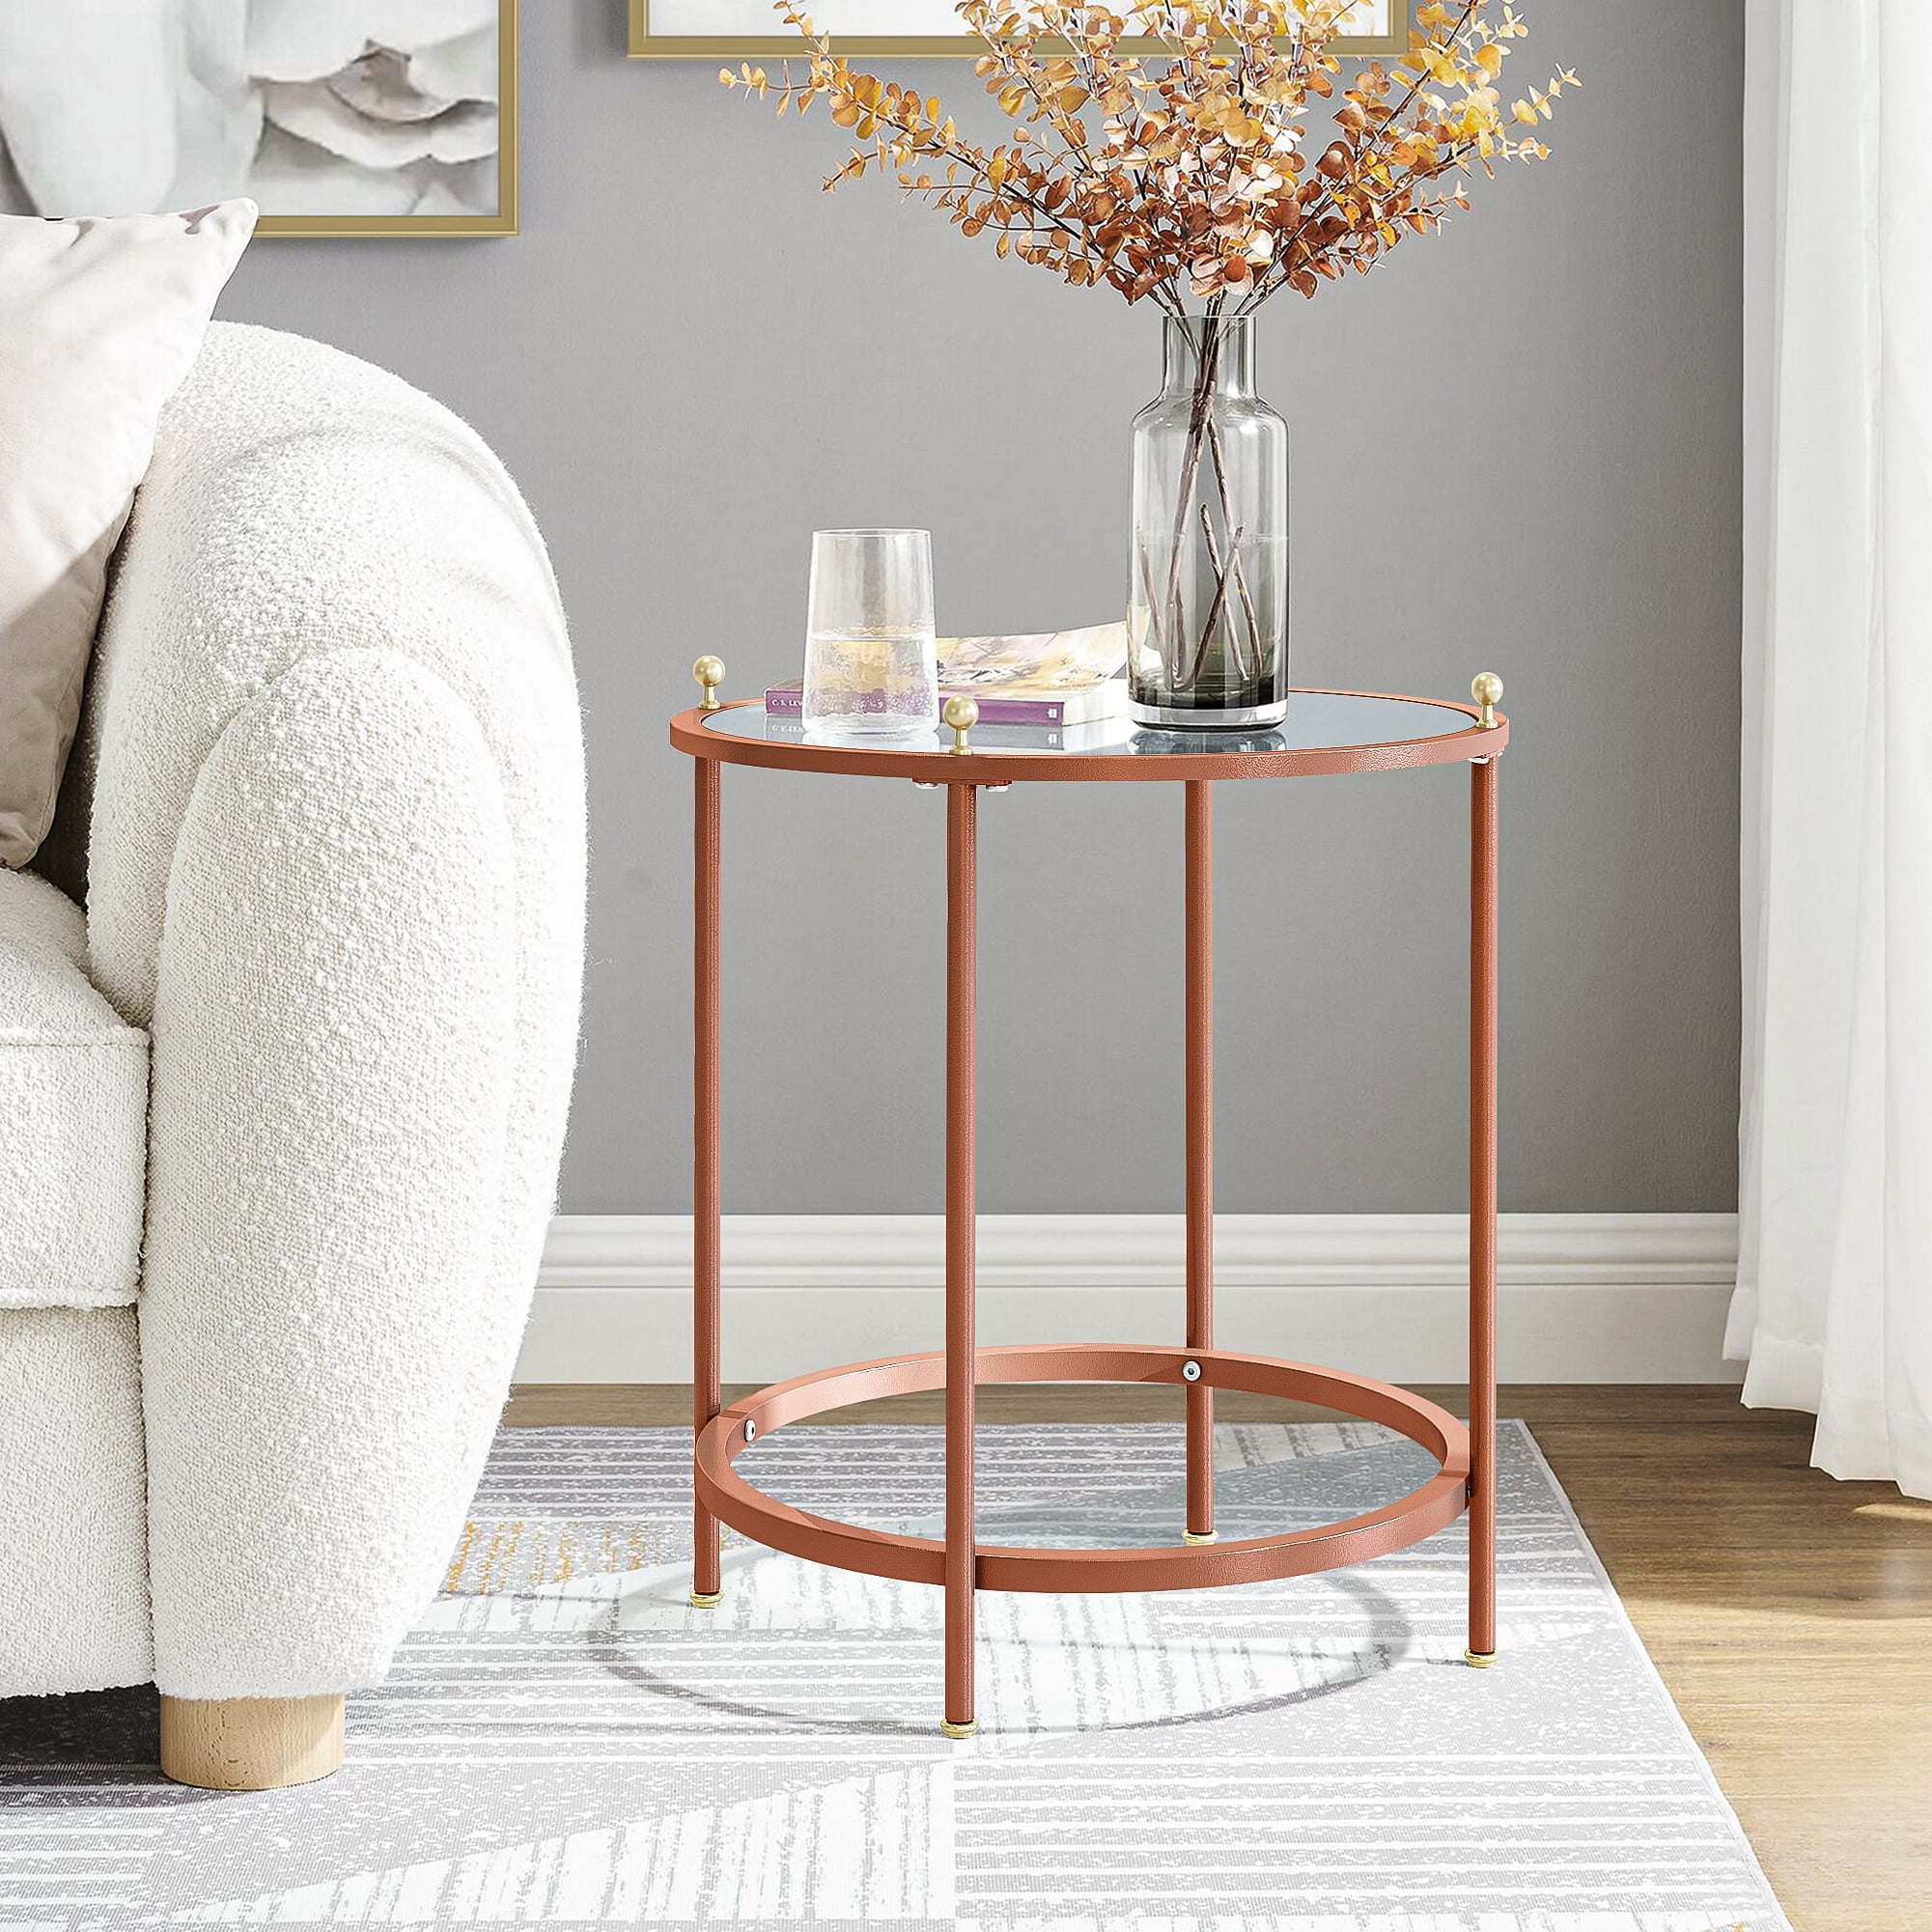 Resenkos Tempered Glass Tabletop End Table, Round Storage Side Table with Rose Golden Metal Frame for Bedroom Living Room